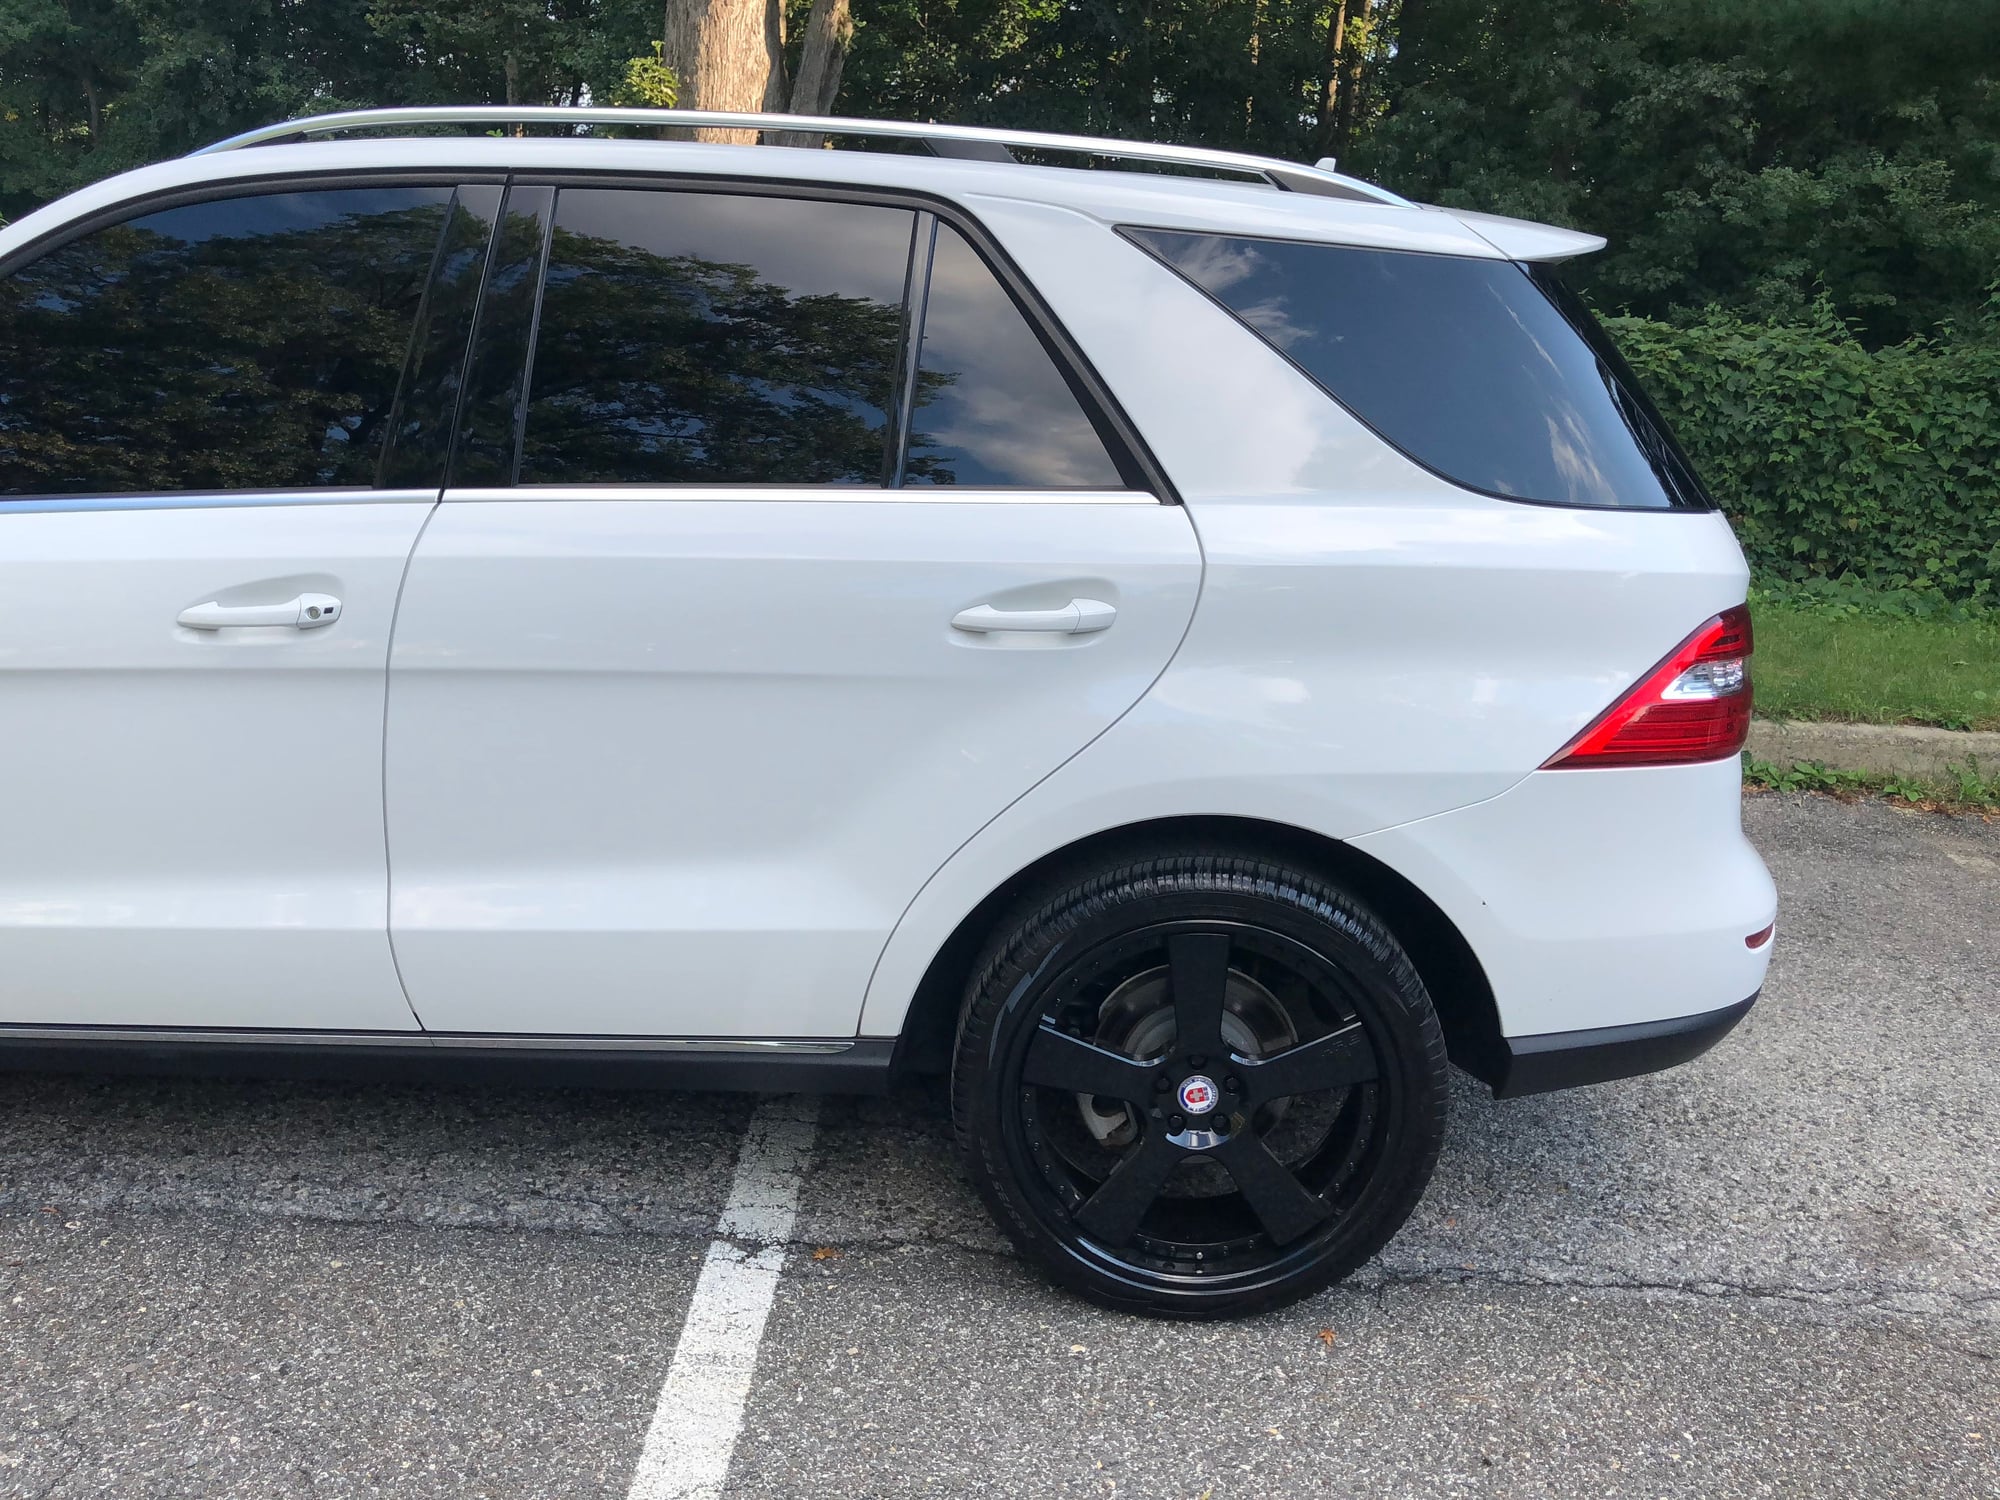 Wheels and Tires/Axles - 22x9 inch HRE 945 RL 265/35/22 all season tires TPMS - Used - 2012 to 2015 Mercedes-Benz ML350 - Yonkers, NY 10710, United States